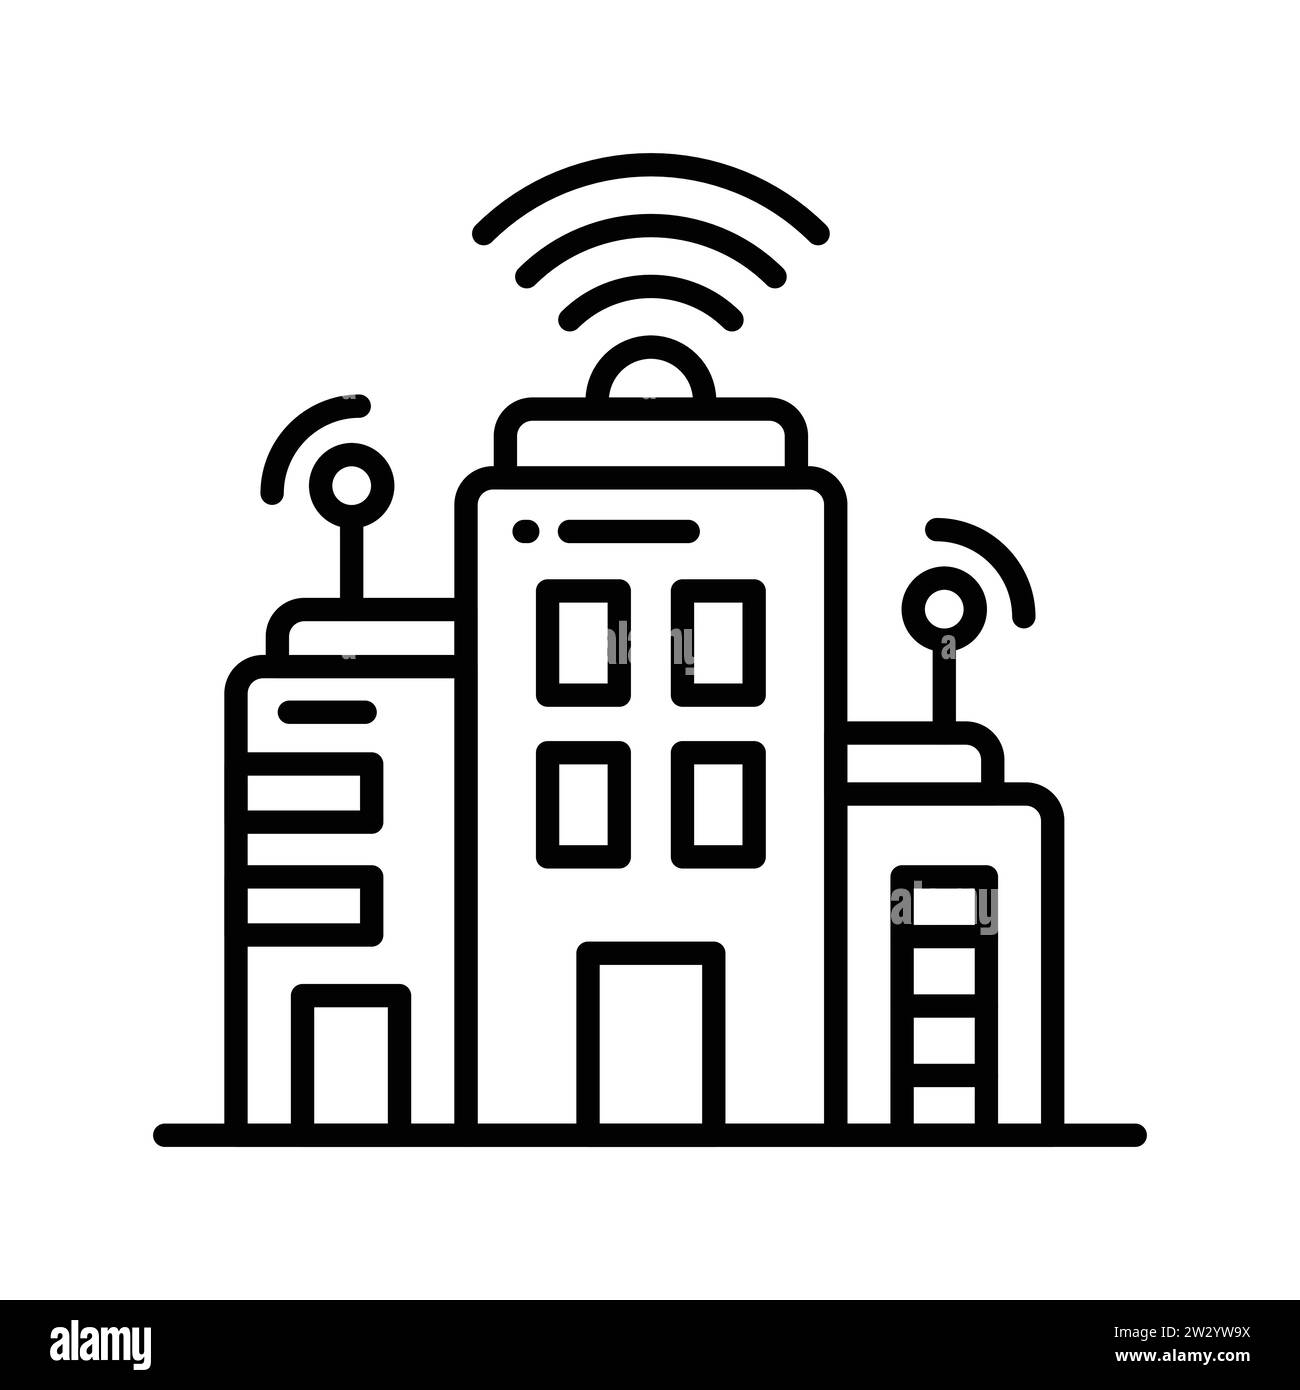 Grab this creatively designed smart city icon in trendy style, 5G technology vector Stock Vector